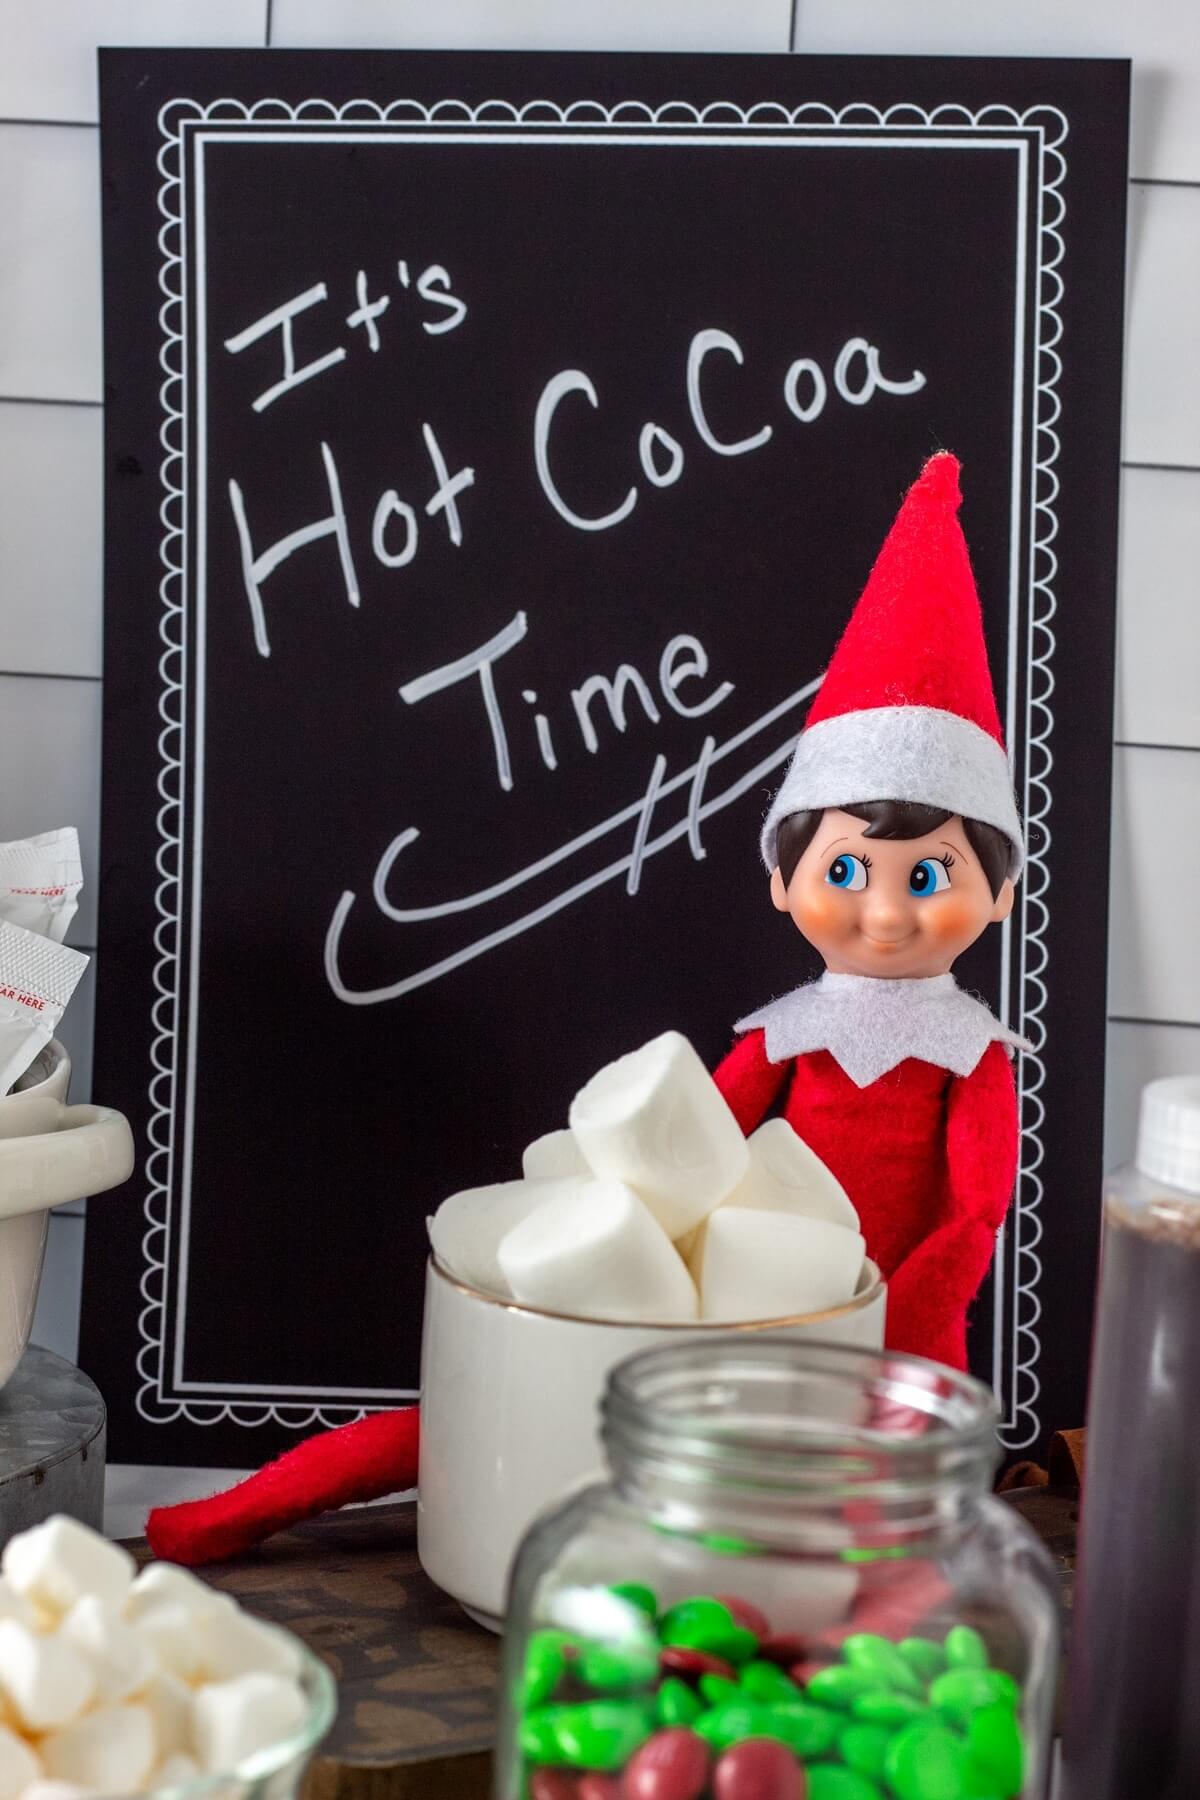 elf with a cup of hot cocoa and a chalkboard that says "It's hot cocoa time."